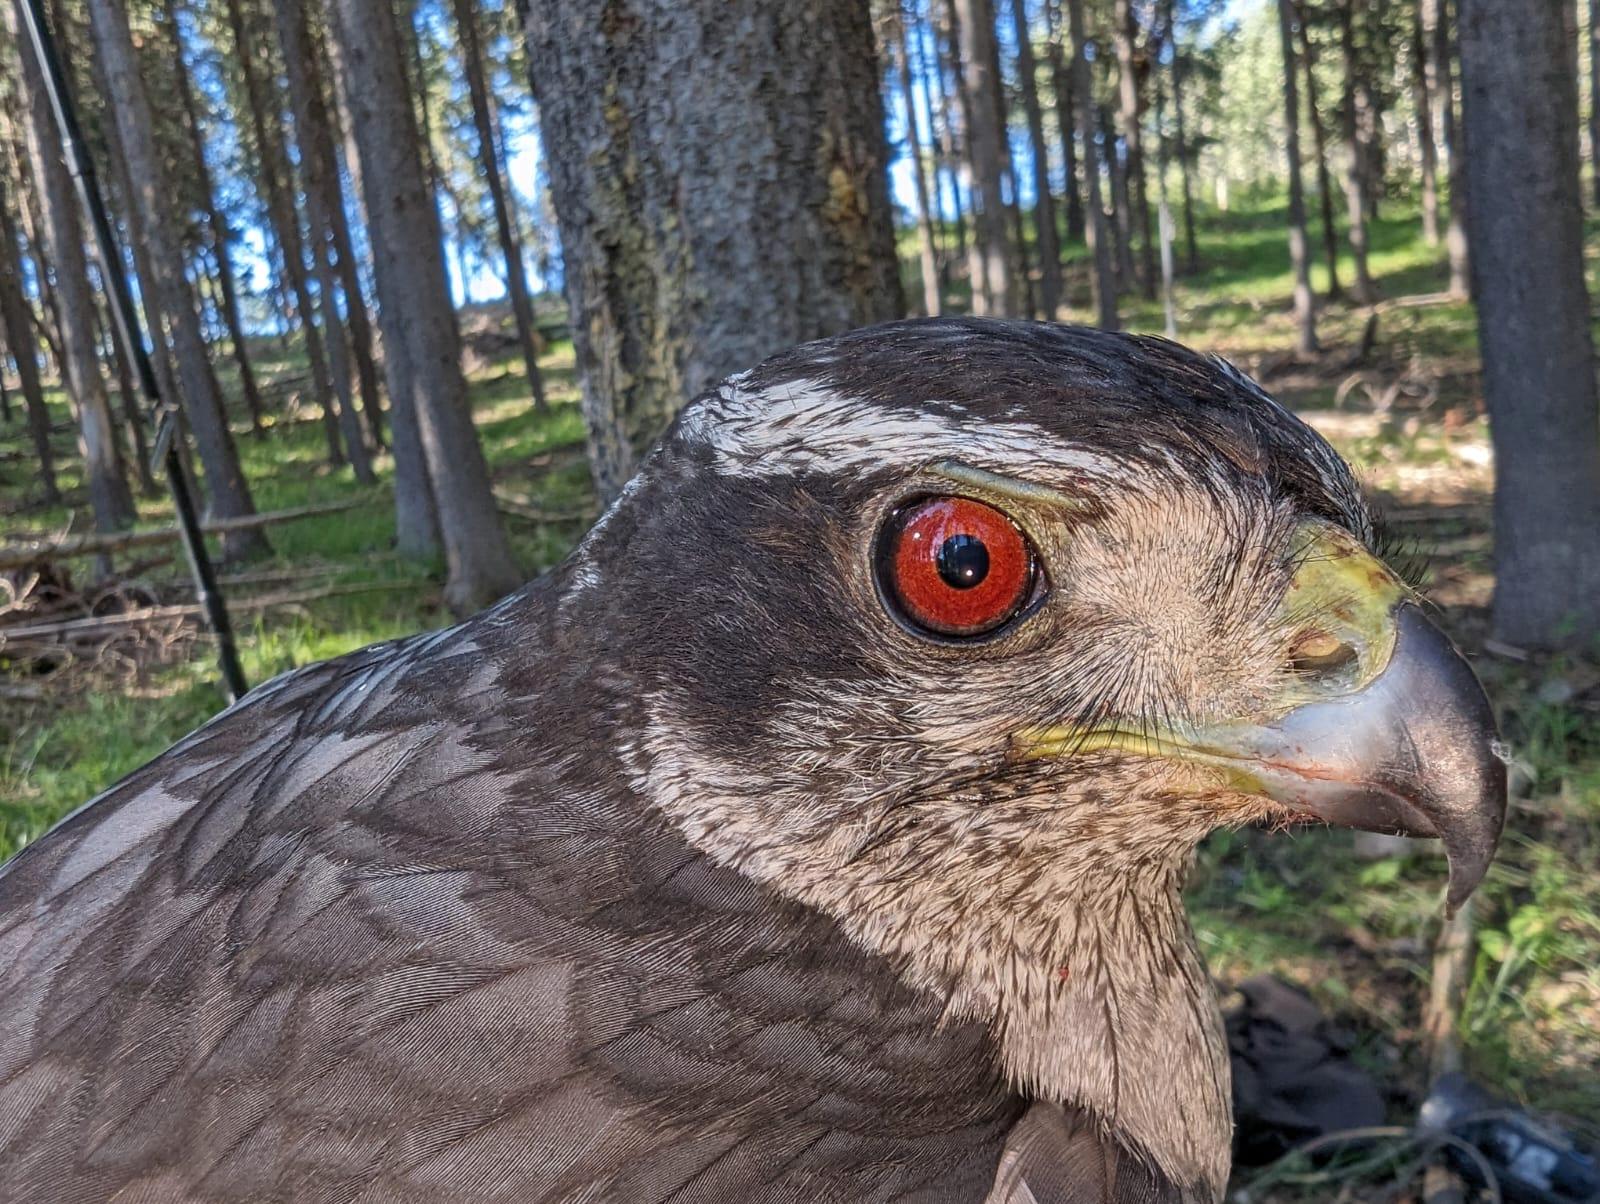 an extreme closeup of a goshawk's face shows the black and gray patterned face, and fine details including the small feathers around the bird's eyes, the intense bright red eye, strong brow bone, and even some blood around the mouth from his most recent meal. The background shows lodgepole pine forest with an open grassy understory